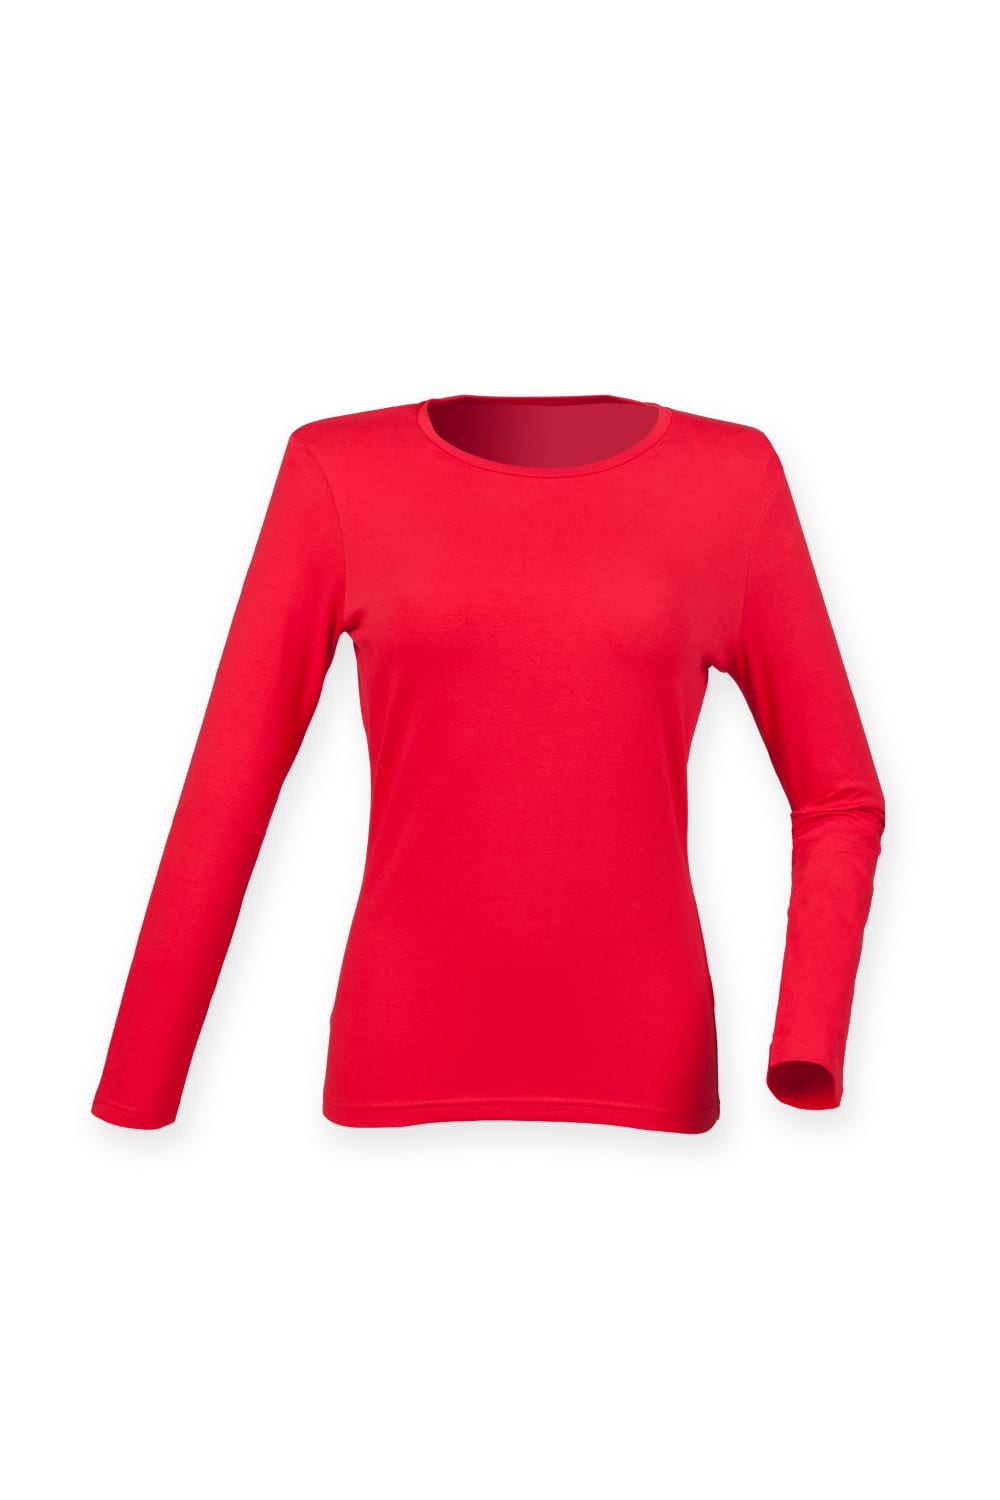 Skinni Fit Womens/Ladies Feel Good Stretch Long Sleeve T-Shirt (Bright Red)